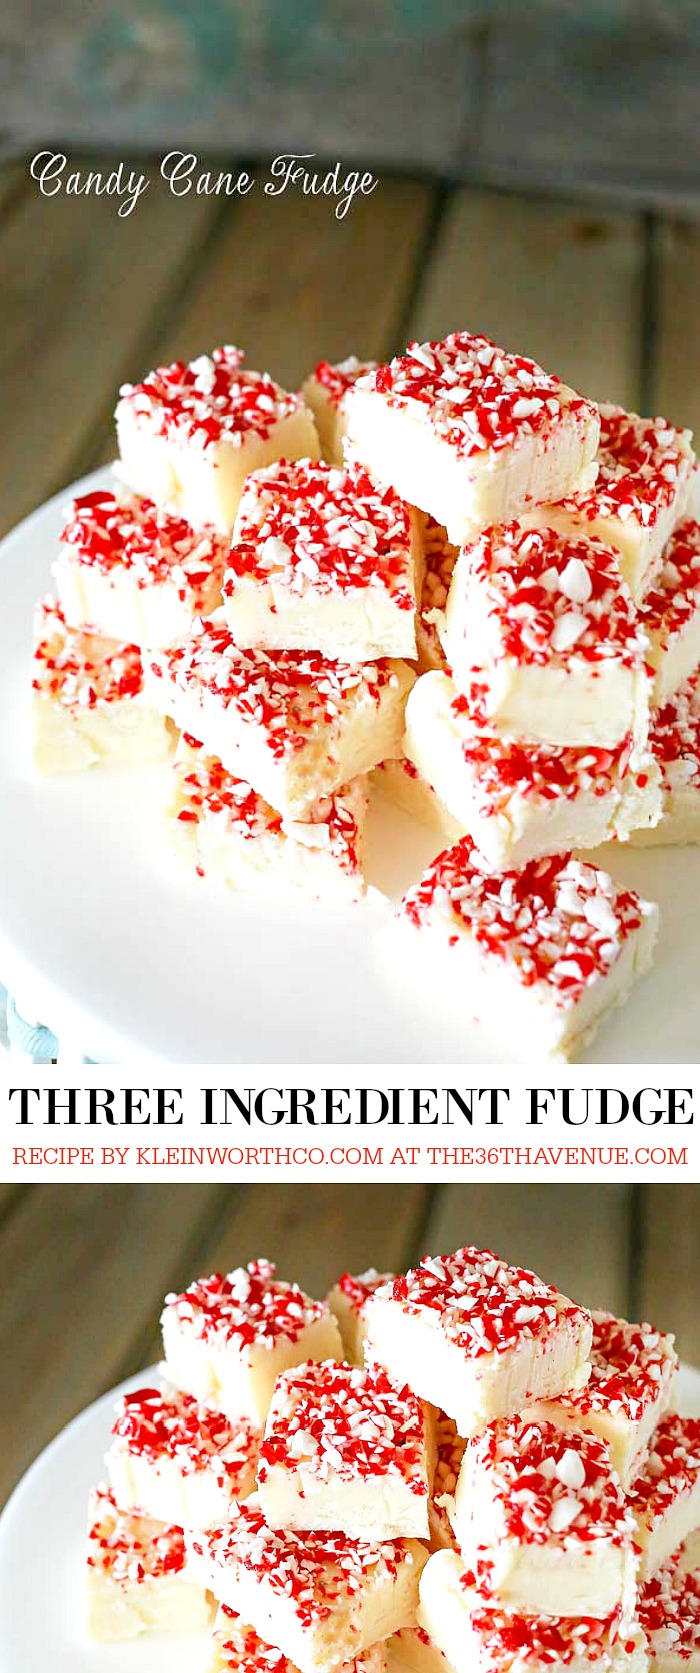 Christmas Recipes - This is a Three Ingredient Recipe! Make this Candy Cane Fudge Recipe for your Christmas Parties, neighbor gifts, or simply share it with your family and friends. Such an easy recipe and super delicious! PIN IT NOW and make it later!